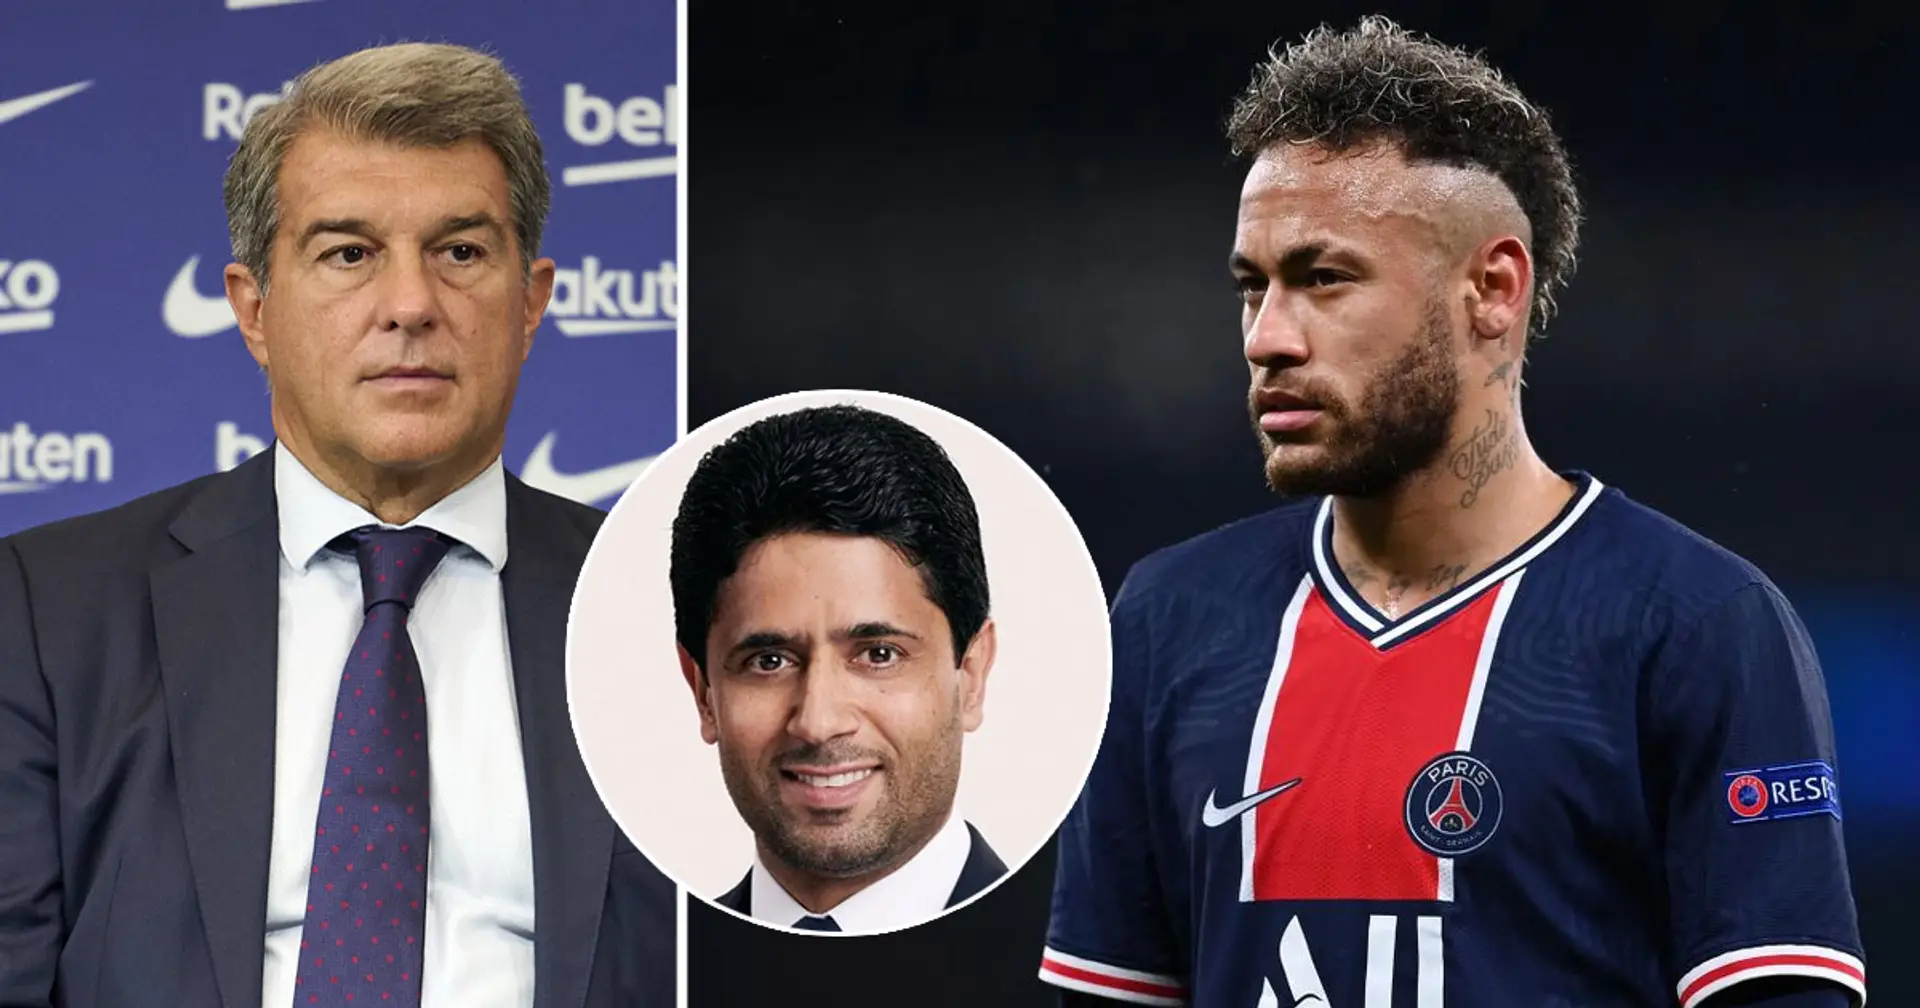 Crazy rumour of the day: PSG president offers Neymar to Barca